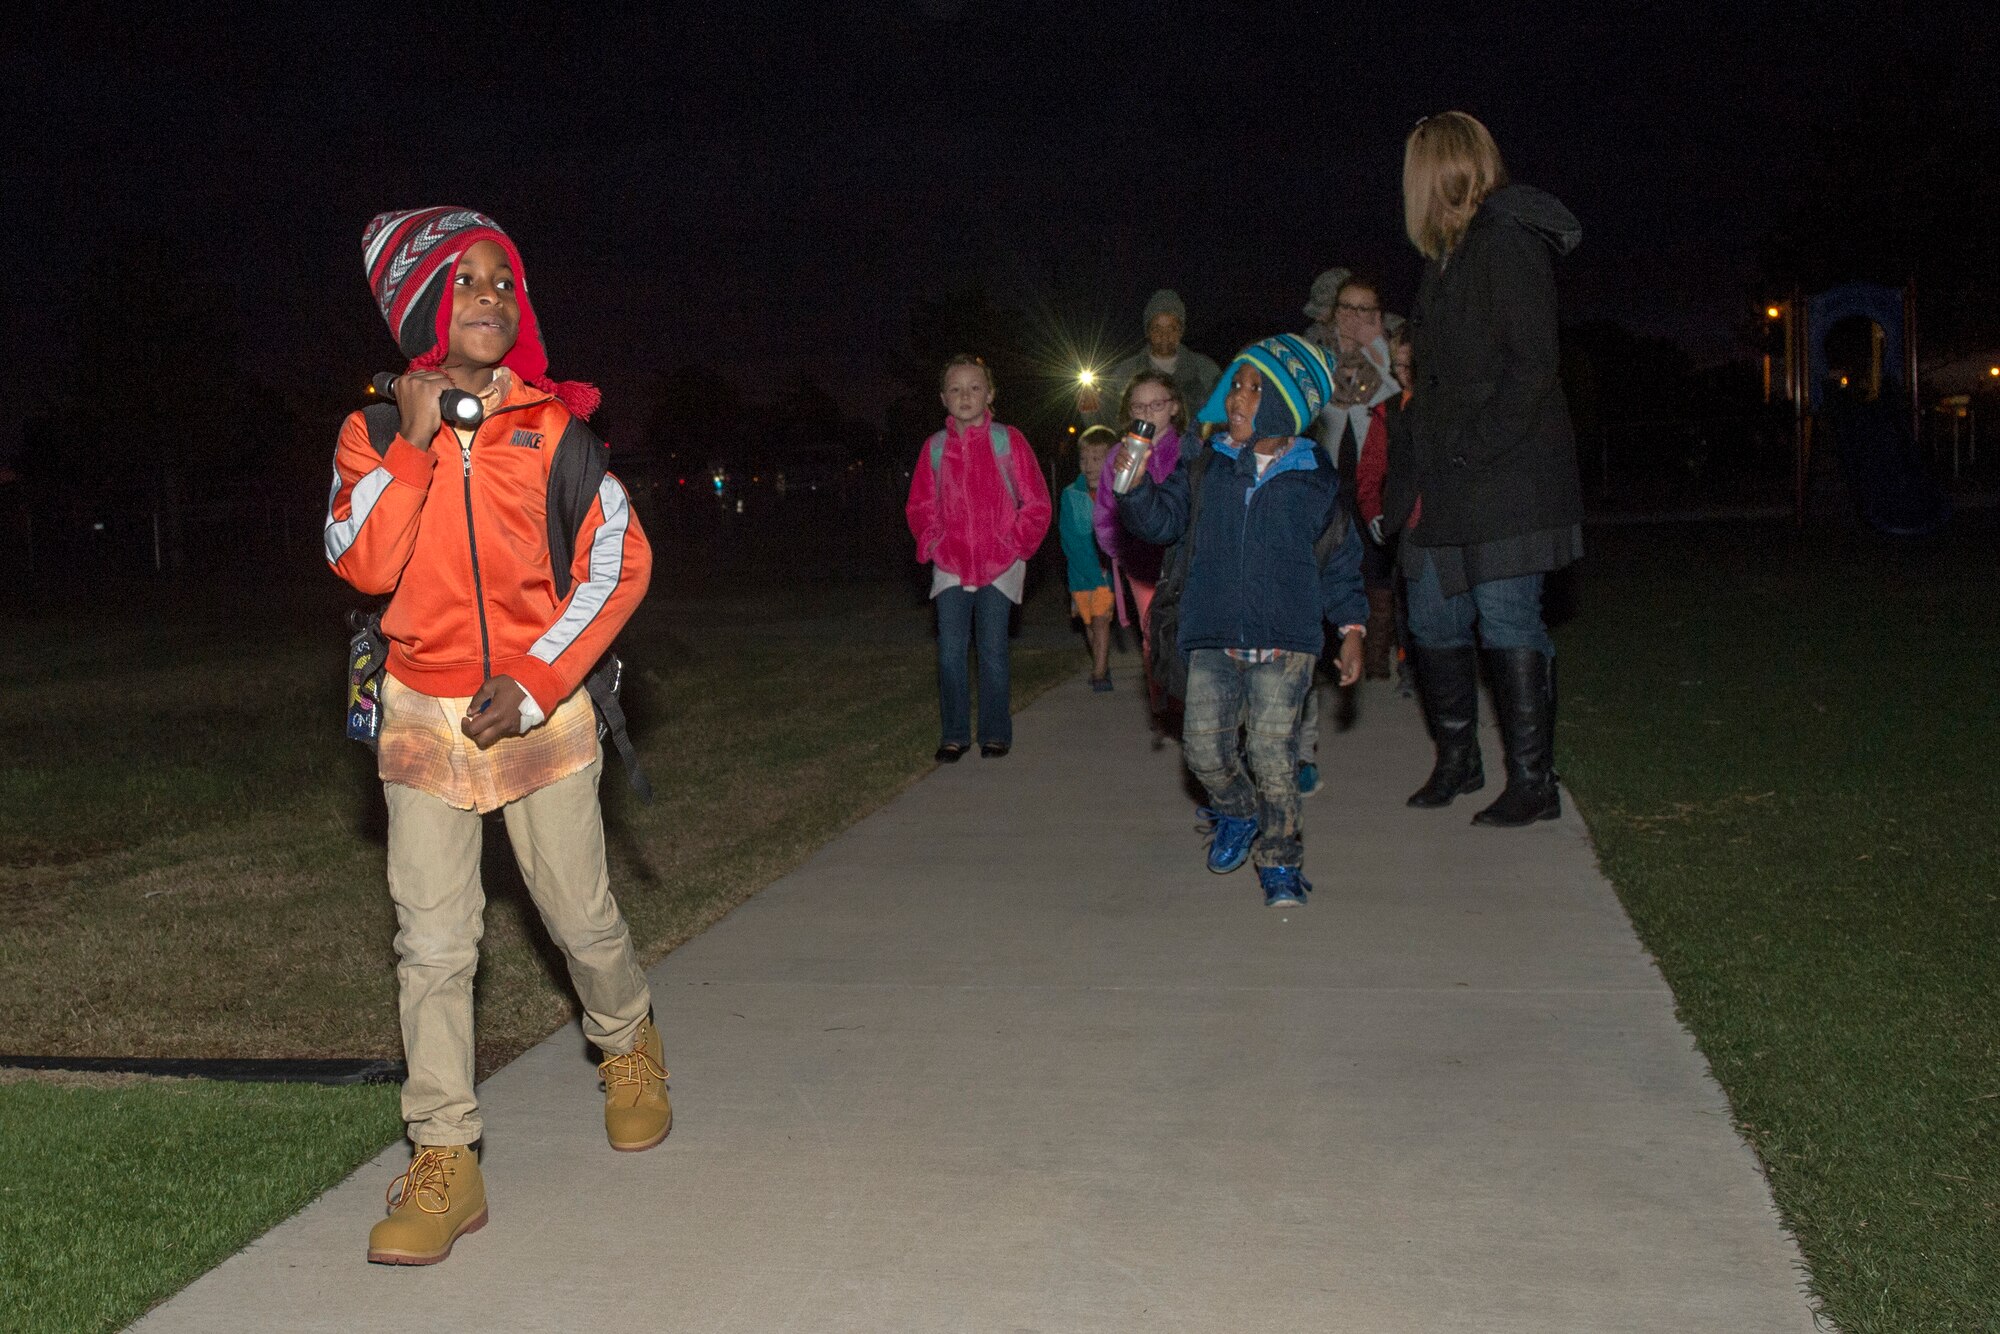 Students arrive at L. Mendel Rivers Elementary School after a ‘Walk to School Day’ event, October 24, 2018, at Altus Air Force Base, Okla.